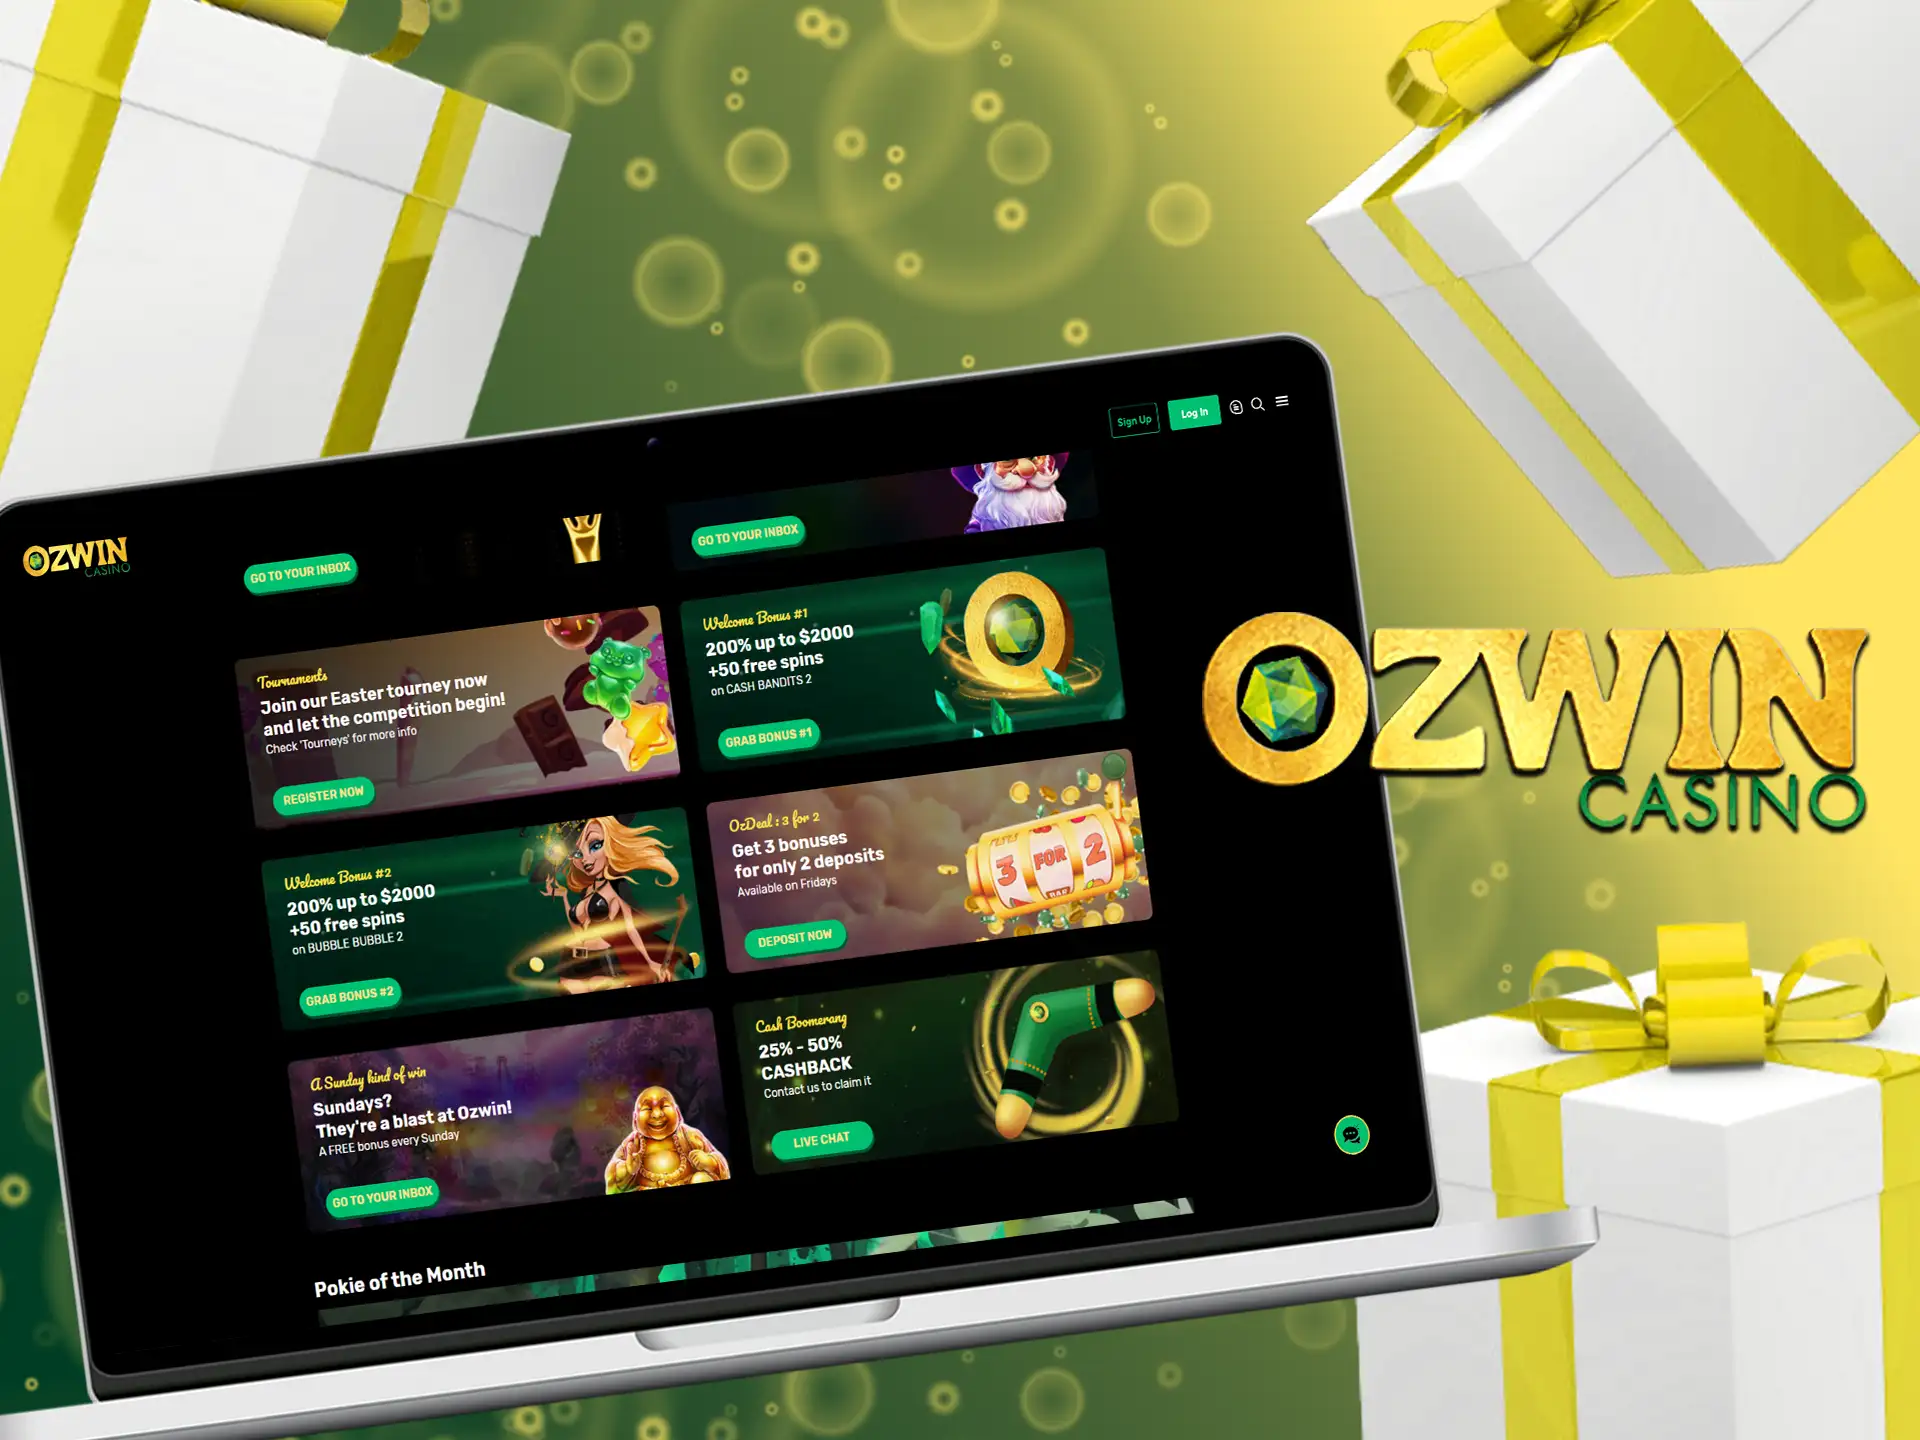 New players at Ozwin Casino receive a generous welcome with a special bonus!